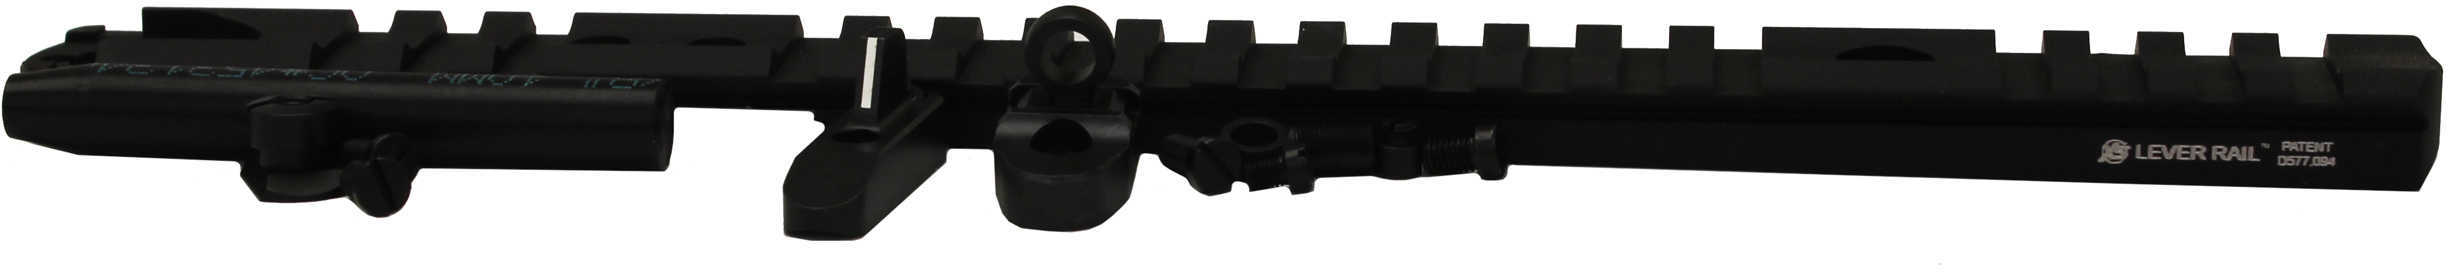 XS Sights Lever Rail Fits Marlin 1894 Black Anodized Includes Ghost Ring ML-1004-5